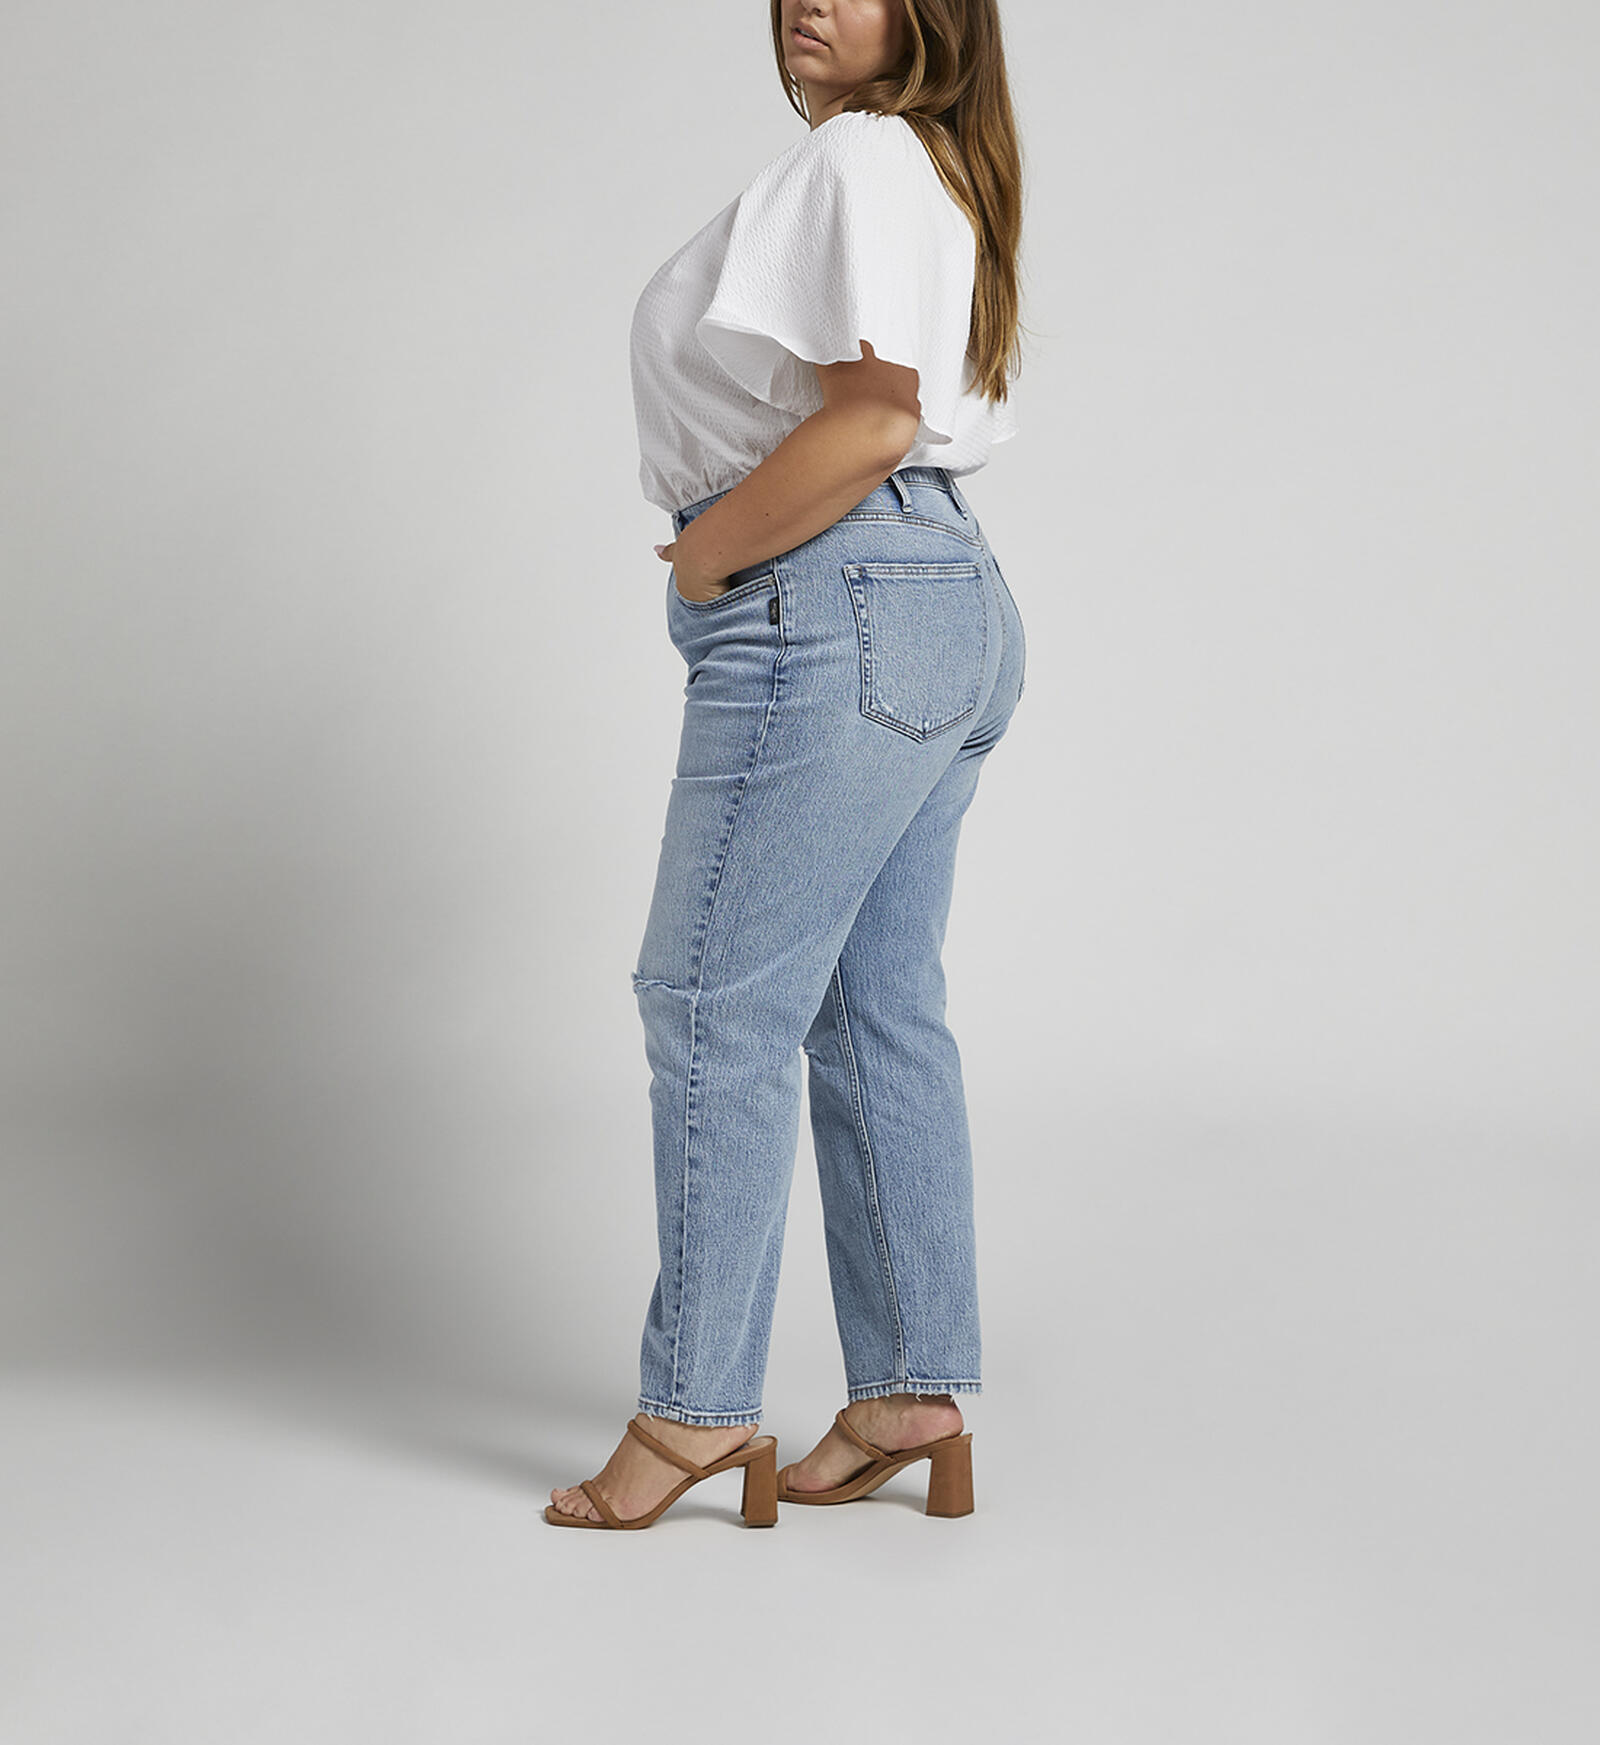 Buy Highly Desirable High Rise Slim Straight Leg Jeans Plus Size for USD  88.00